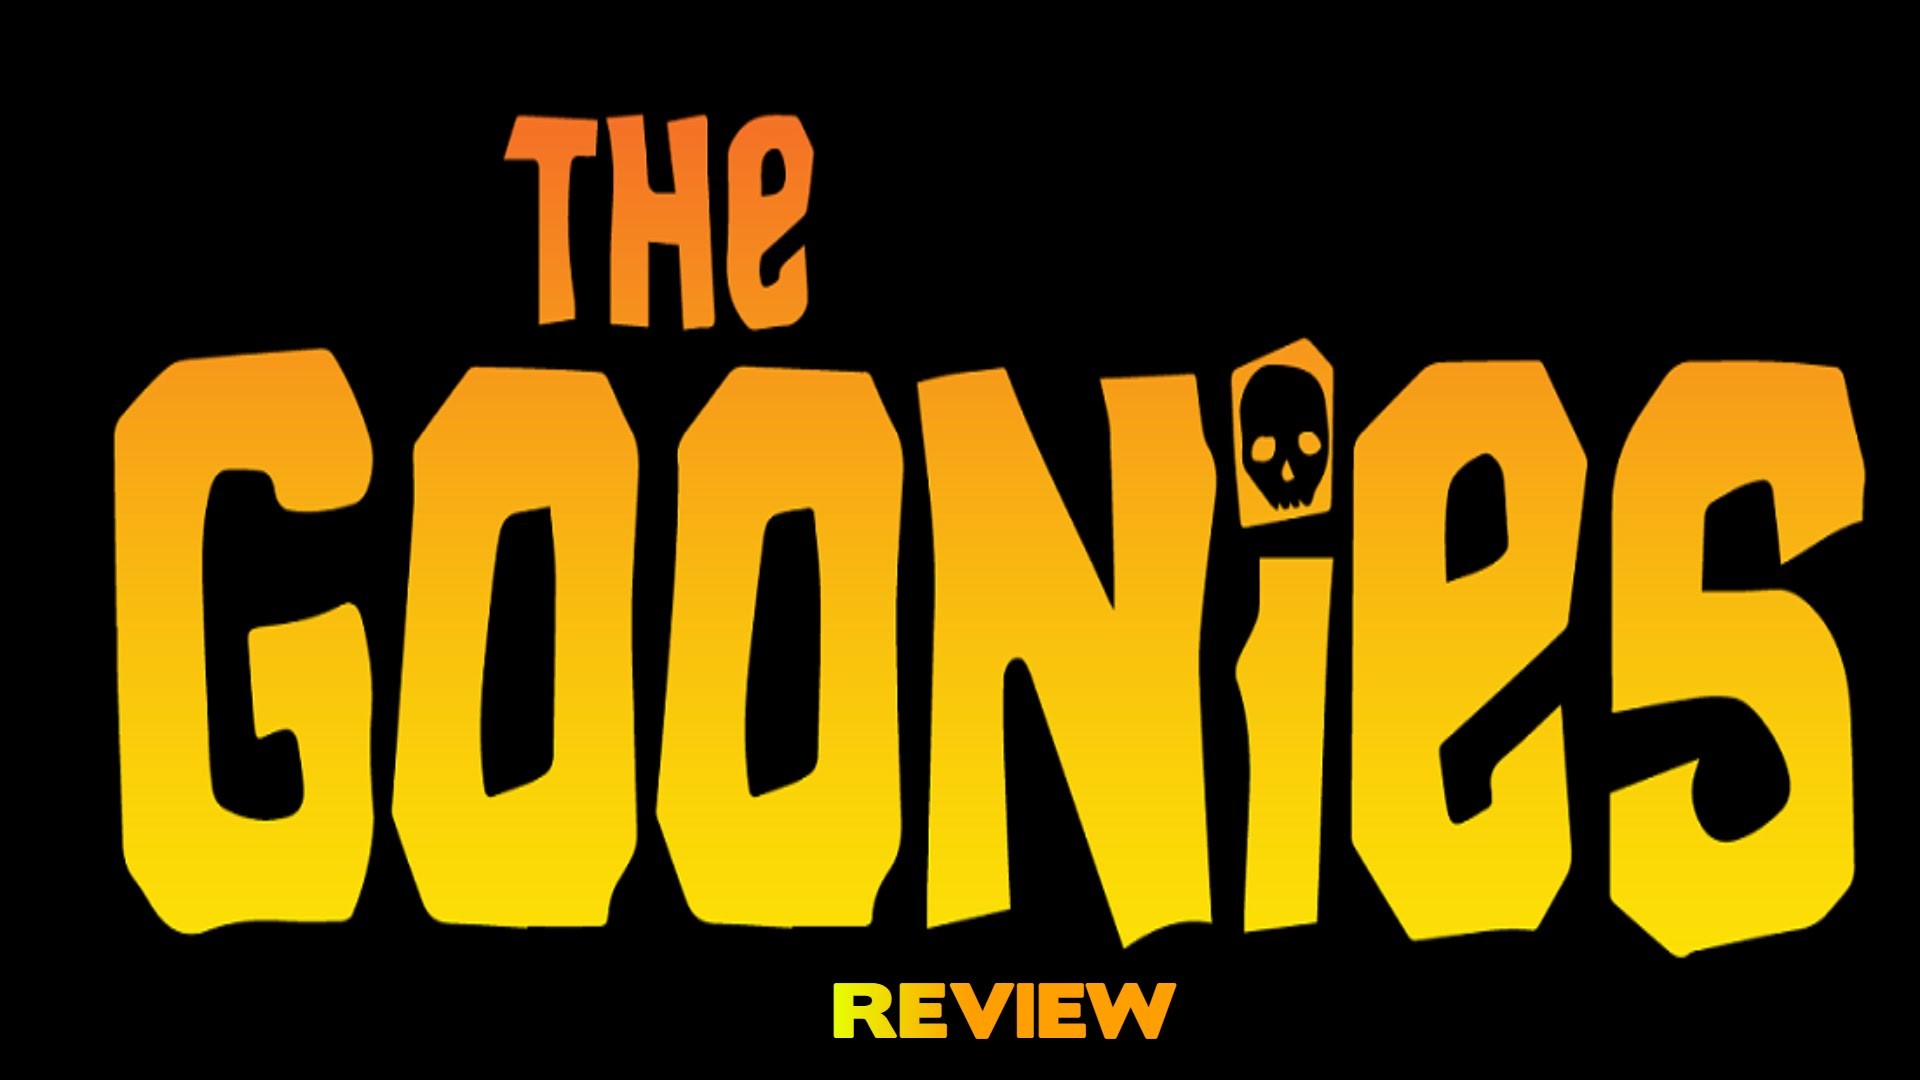 1920x1080 The Goonies Review